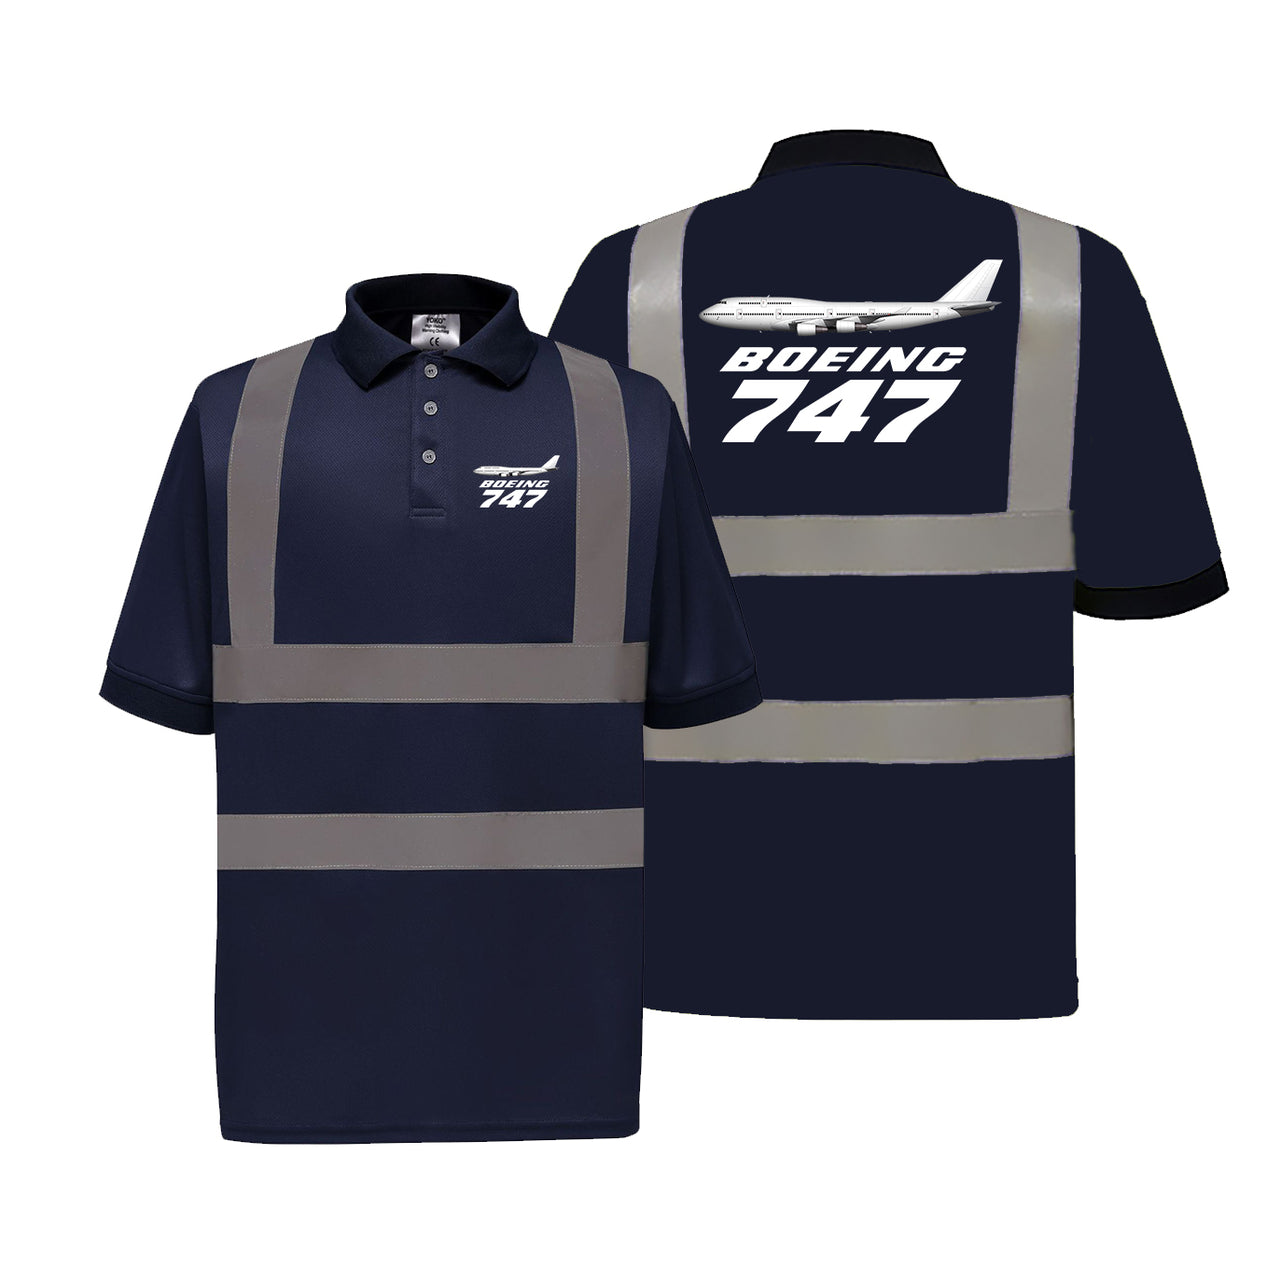 The Boeing 747 Designed Reflective Polo T-Shirts